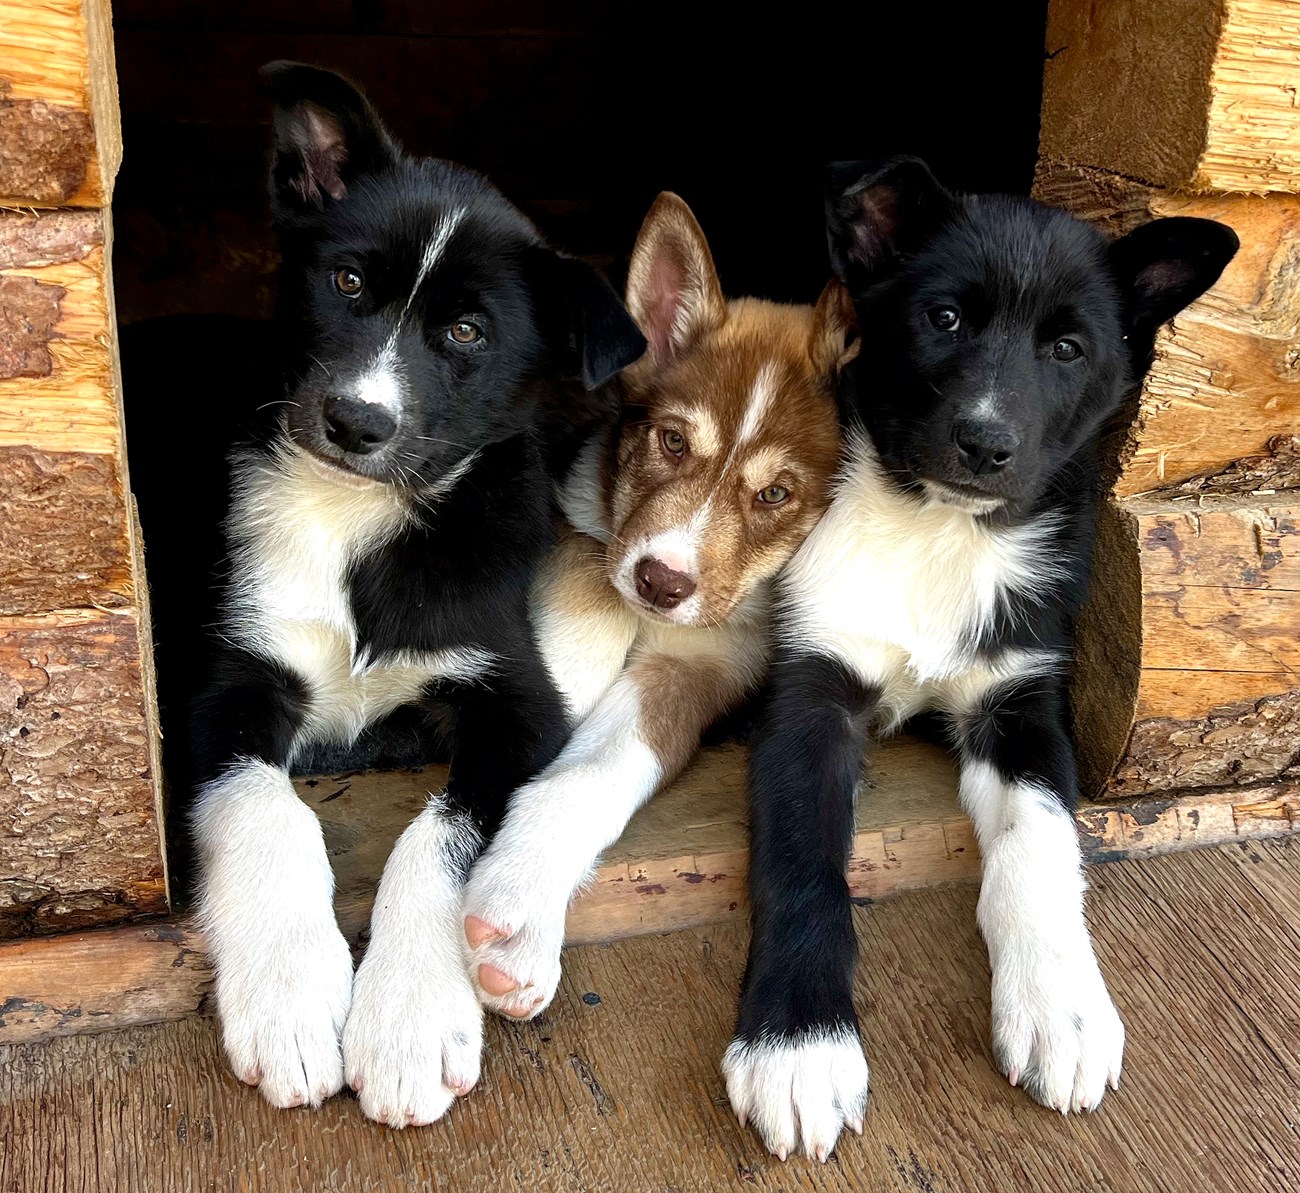 Three puppies look out from a wooden entranceway. Two are black and white and one is brown and white.